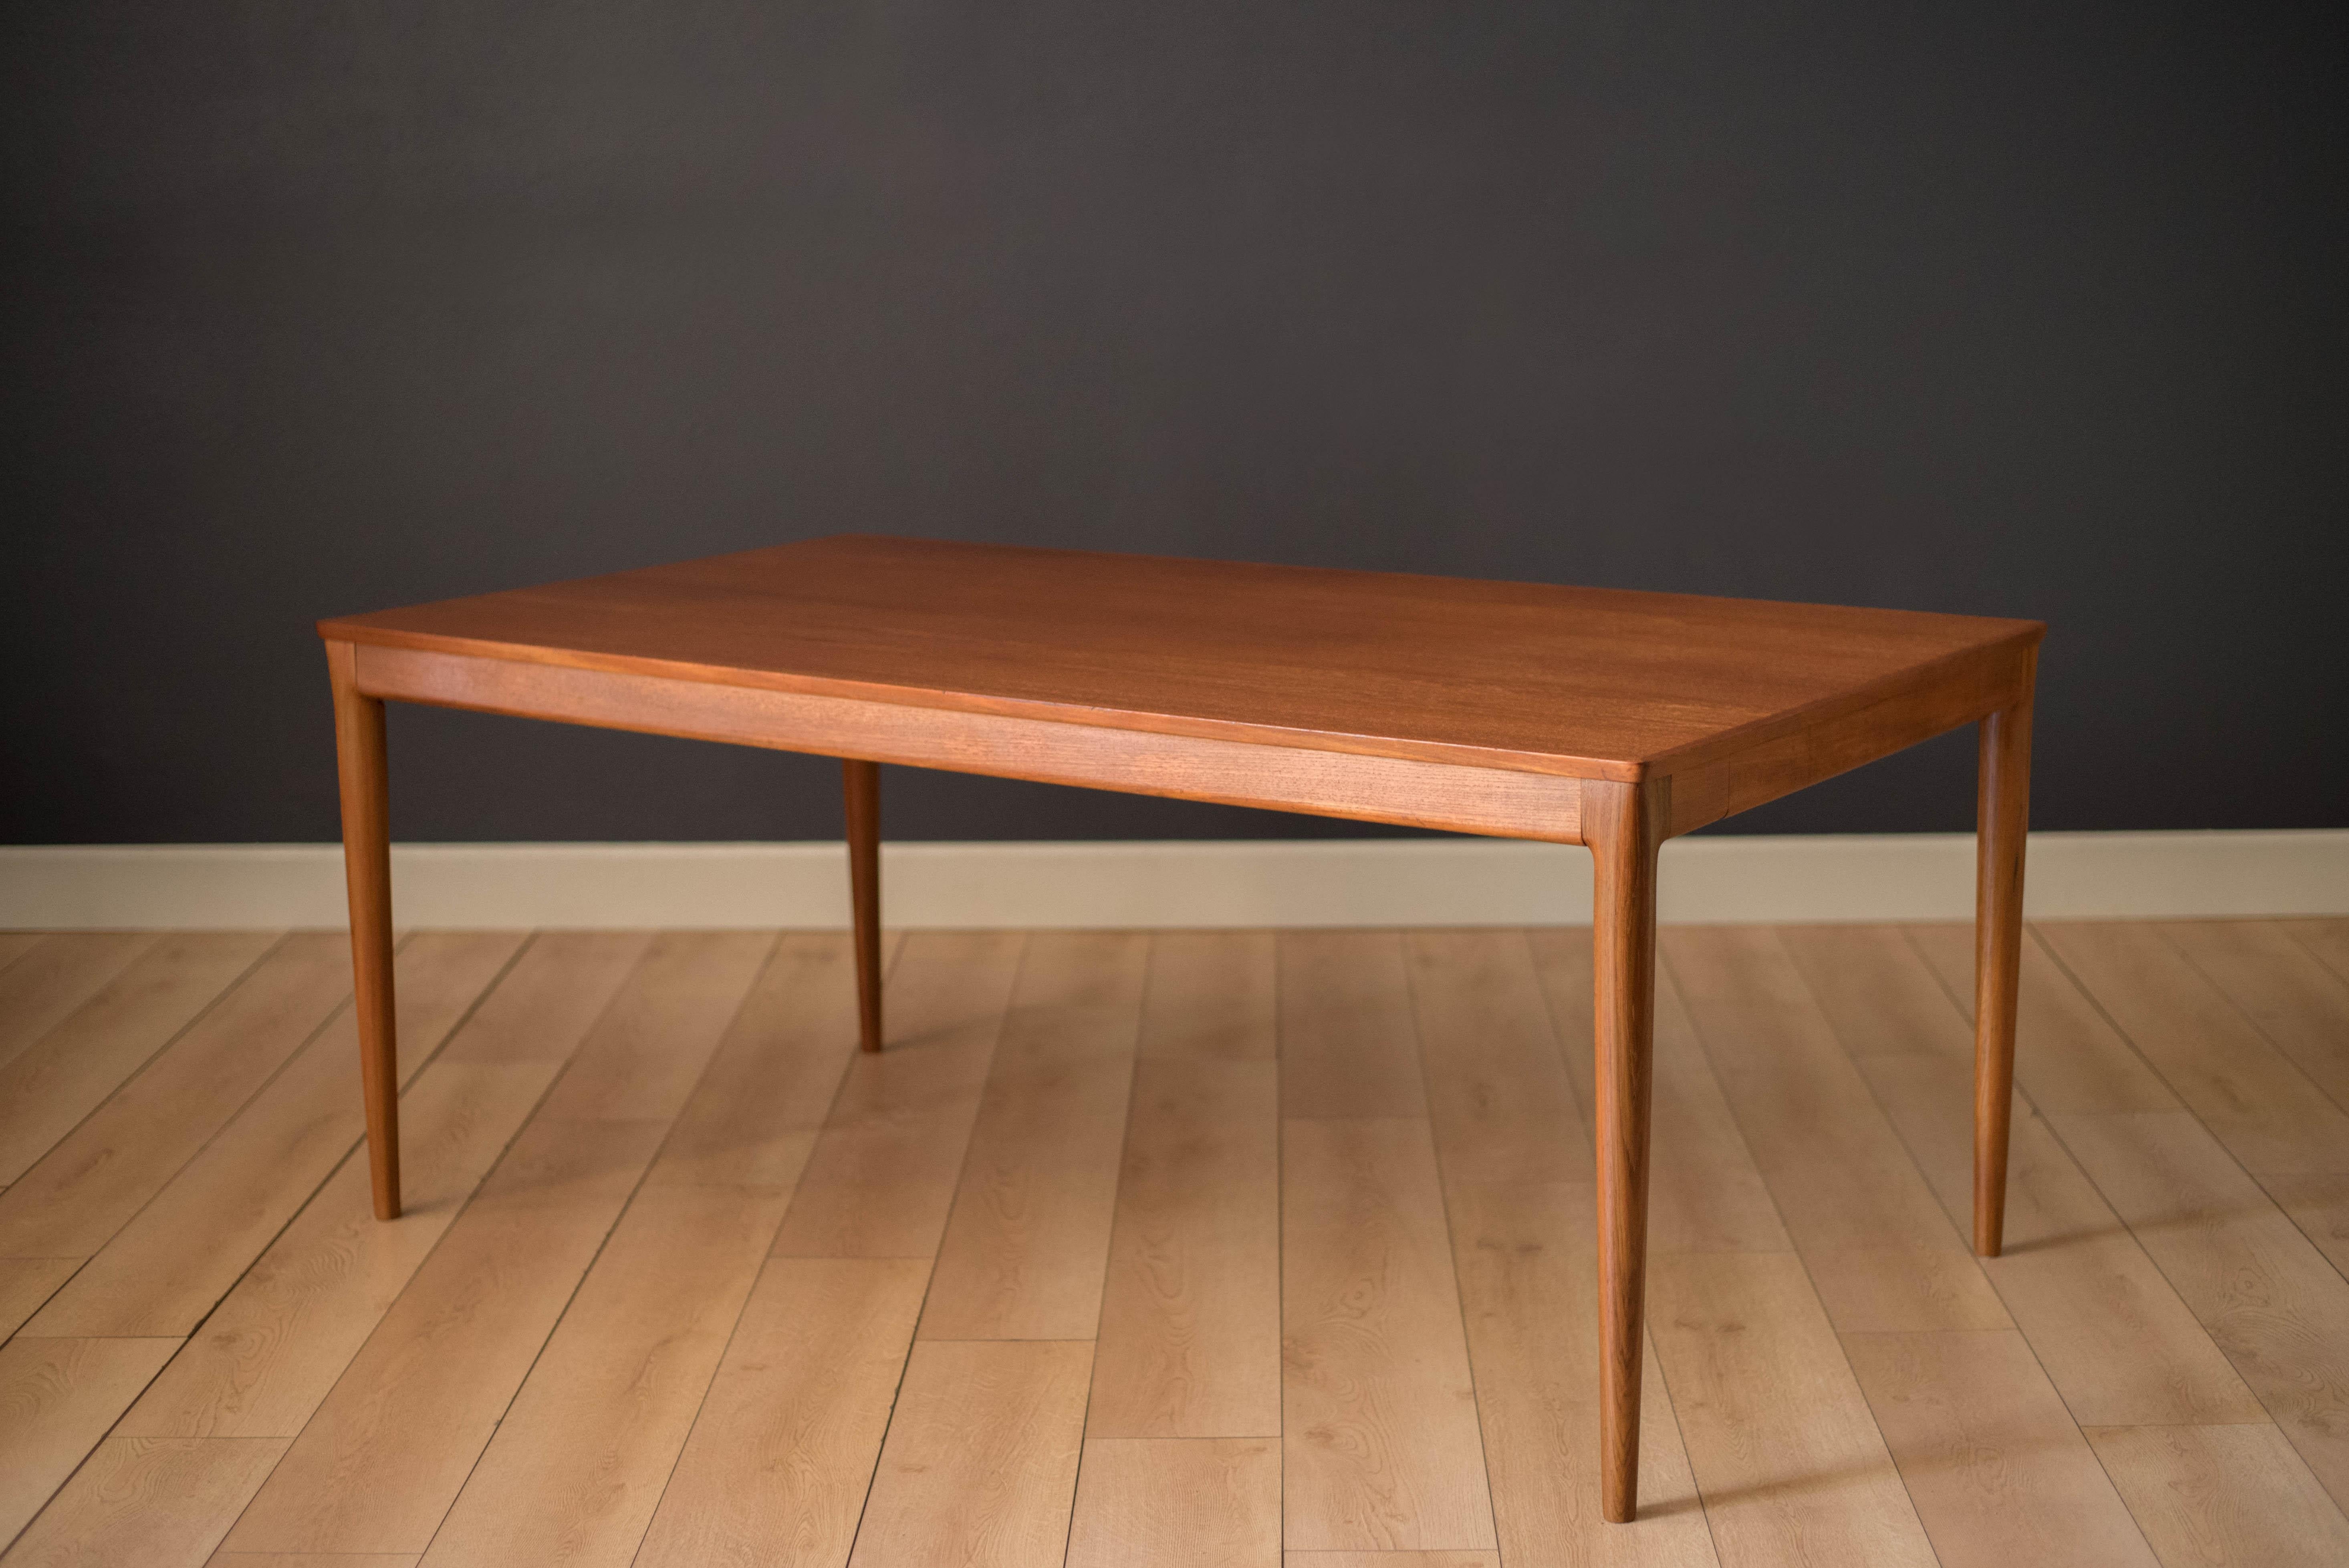 Mid-Century Modern expandable dining table in teak, circa 1960s. This unique piece features a seamless design including two leaves that cleverly store in hidden pullout drawers underneath the table, easy enough for one person to set up. Supported by